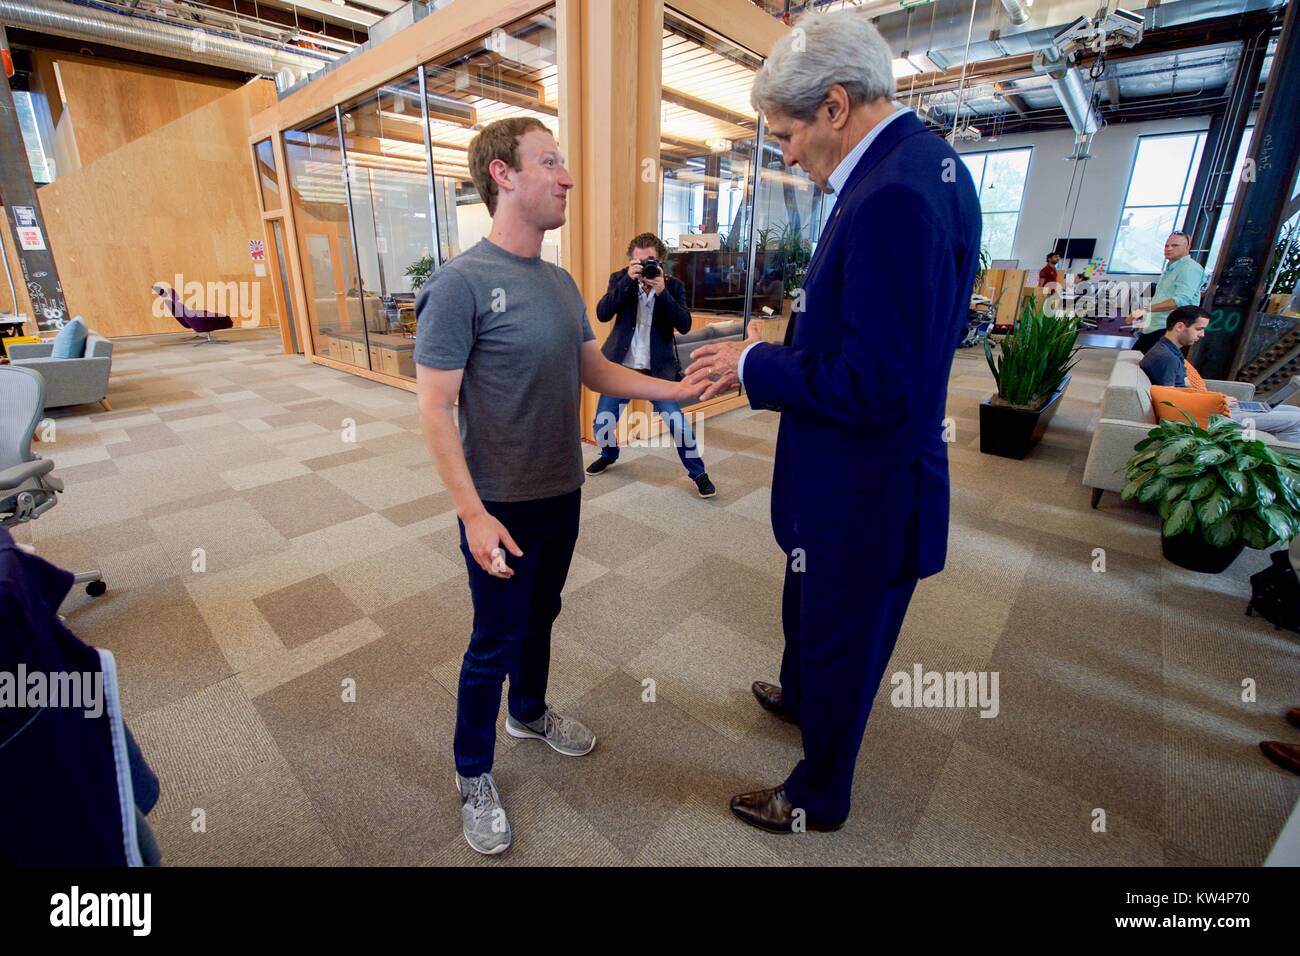 US Secretary of State John Kerry speaking with Facebook CEO Mark Zuckerberg, Menlo Park, California, June 23, 2016. Image courtesy US Department of State. Stock Photo